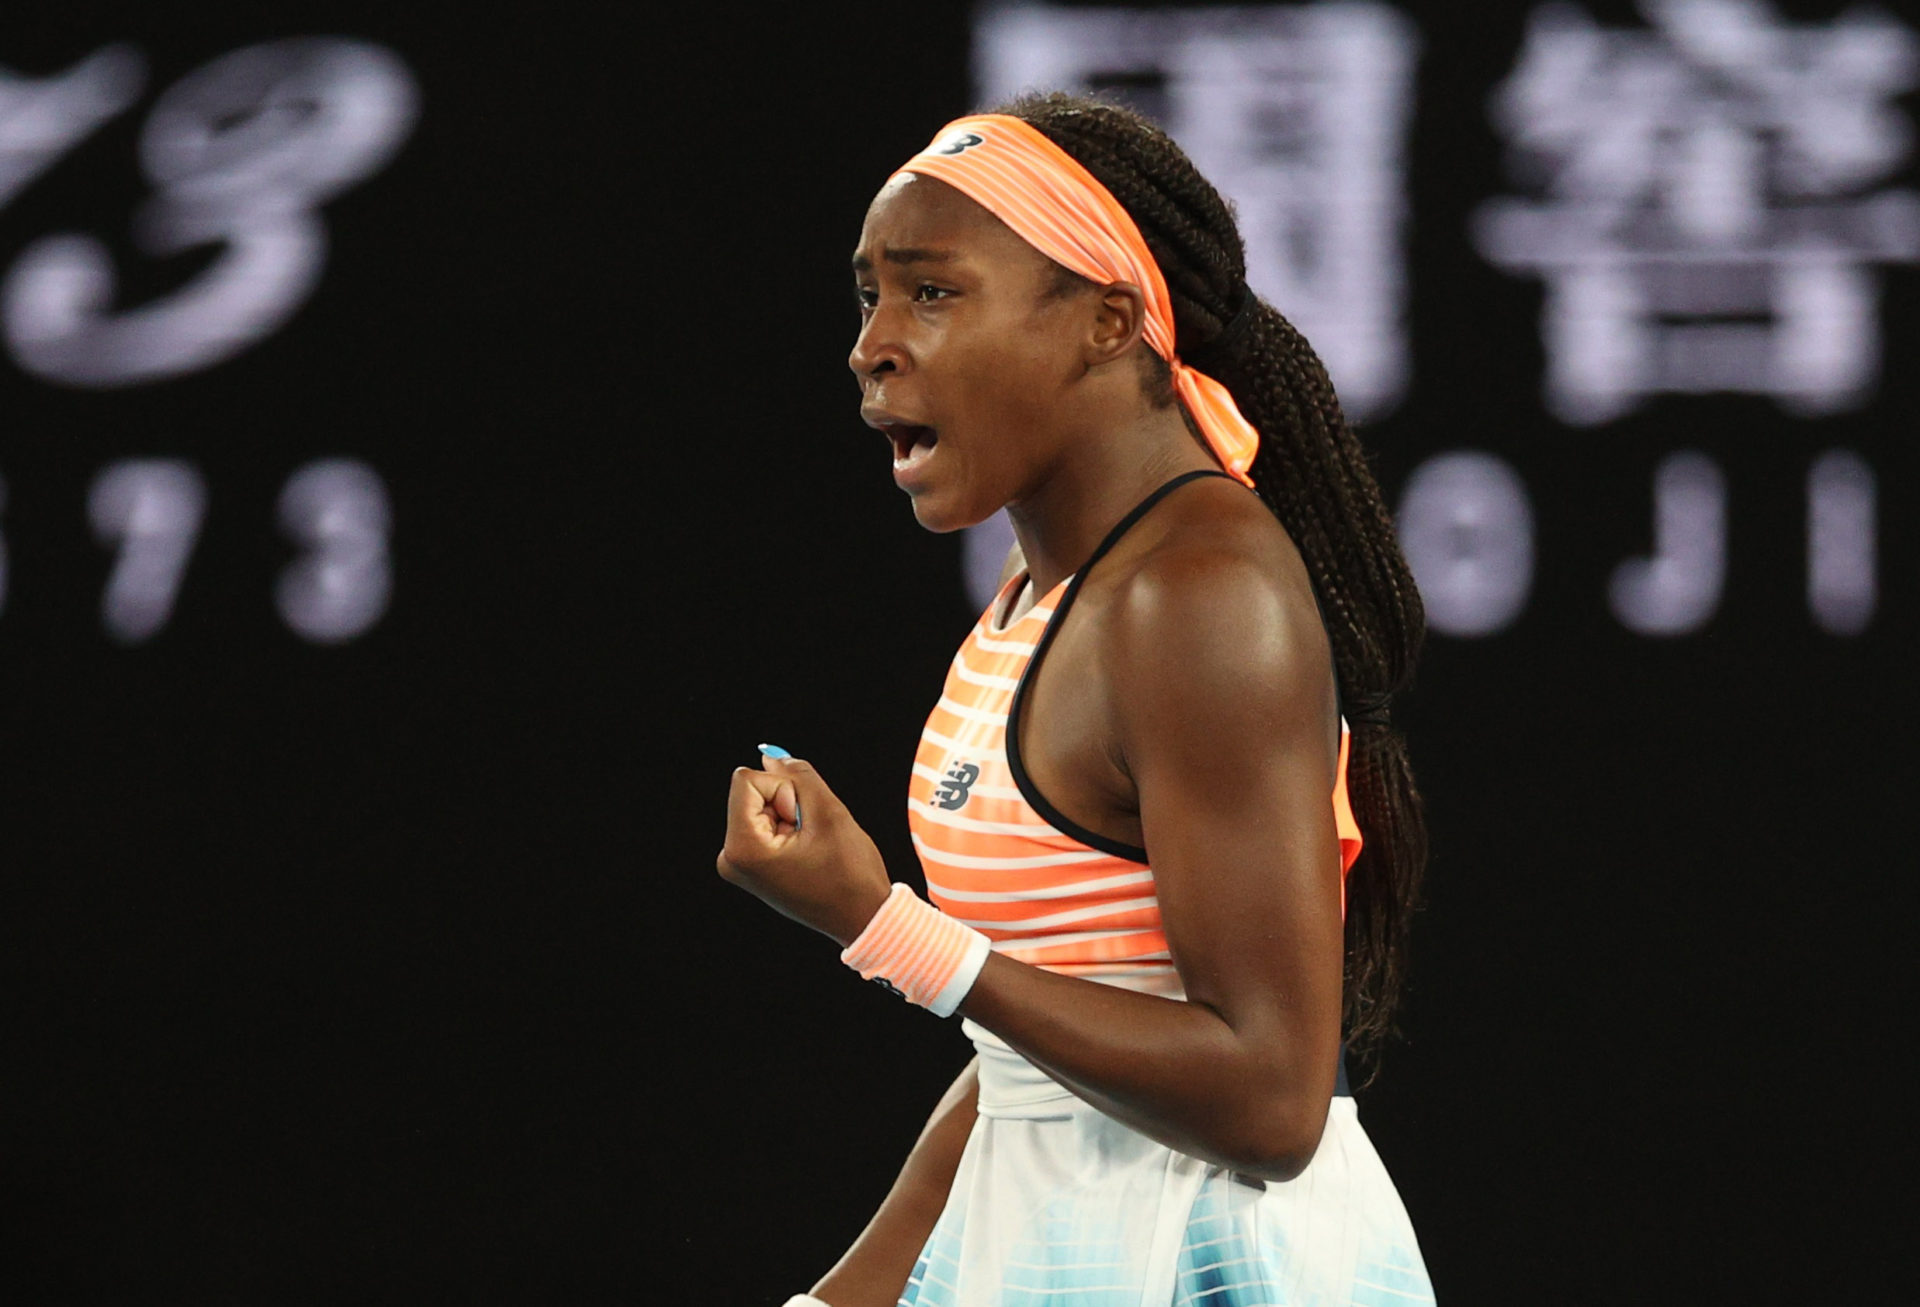 Coco Gauff sees off 12th seed Vondrousova in Dubai - Afroballers